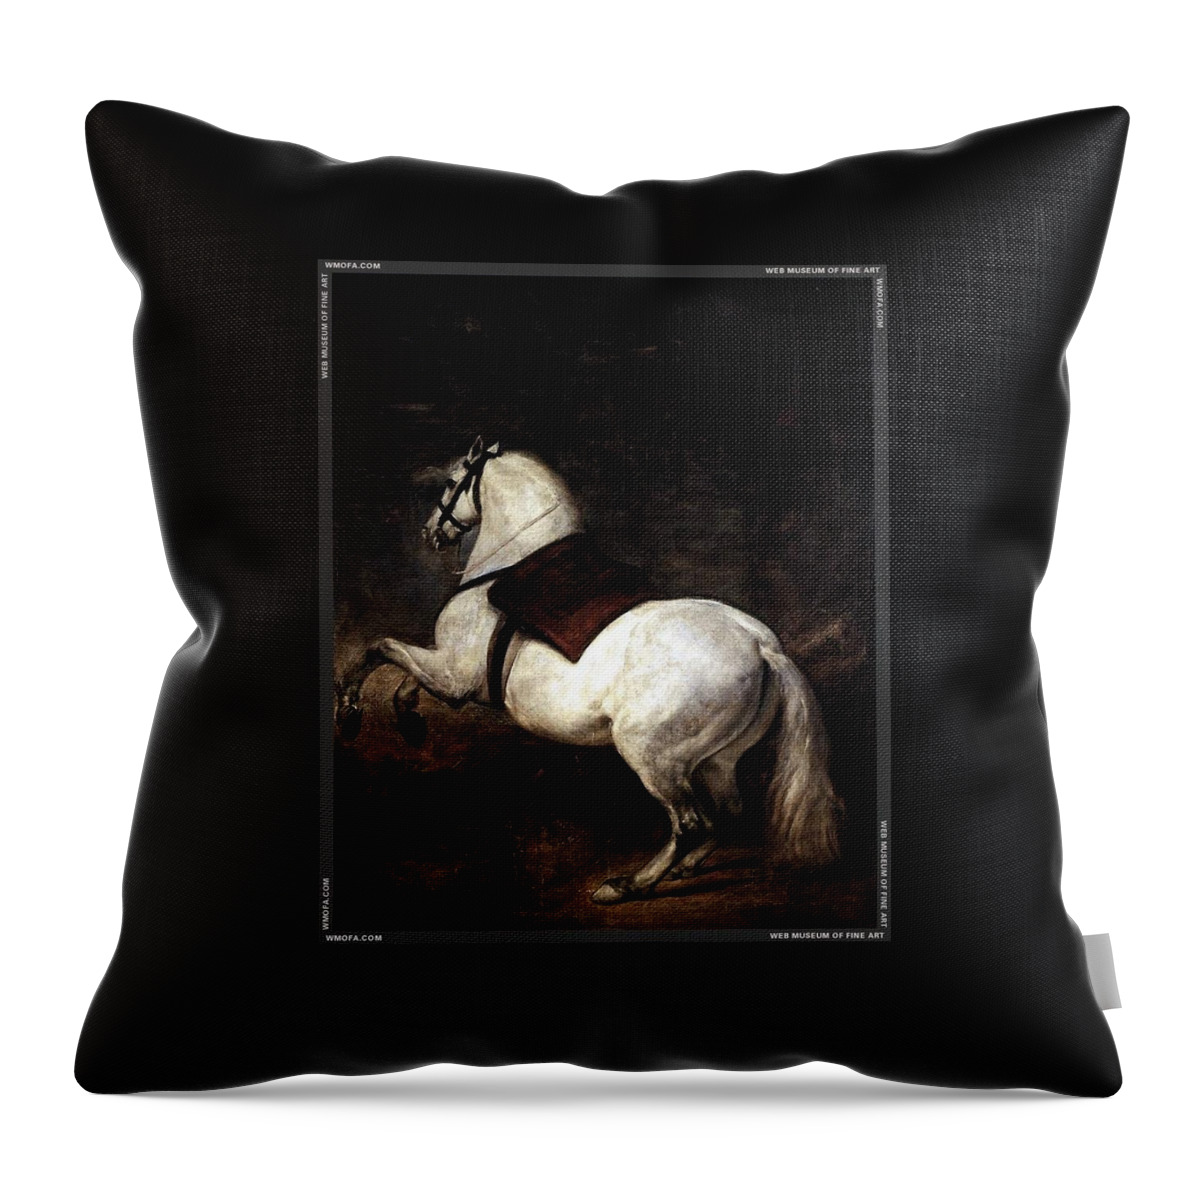 A White Horse By Diego Velazquez Throw Pillow featuring the painting A White Horse by Diego Velazquez by MotionAge Designs